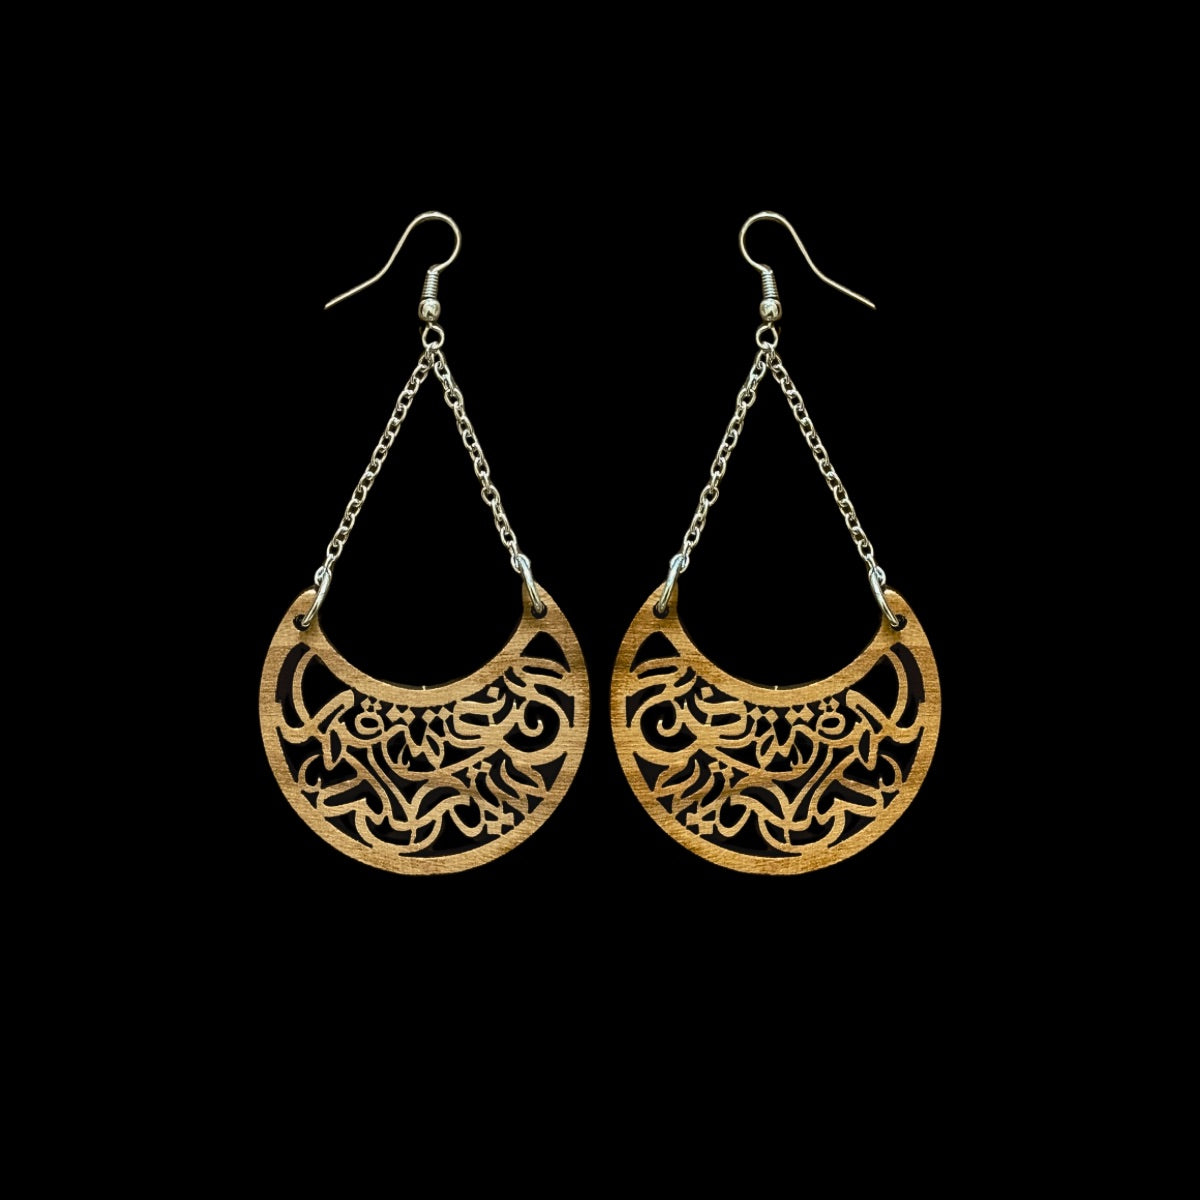 Olive Wood Arabic Calligraphy Earrings "A moon will rise..."